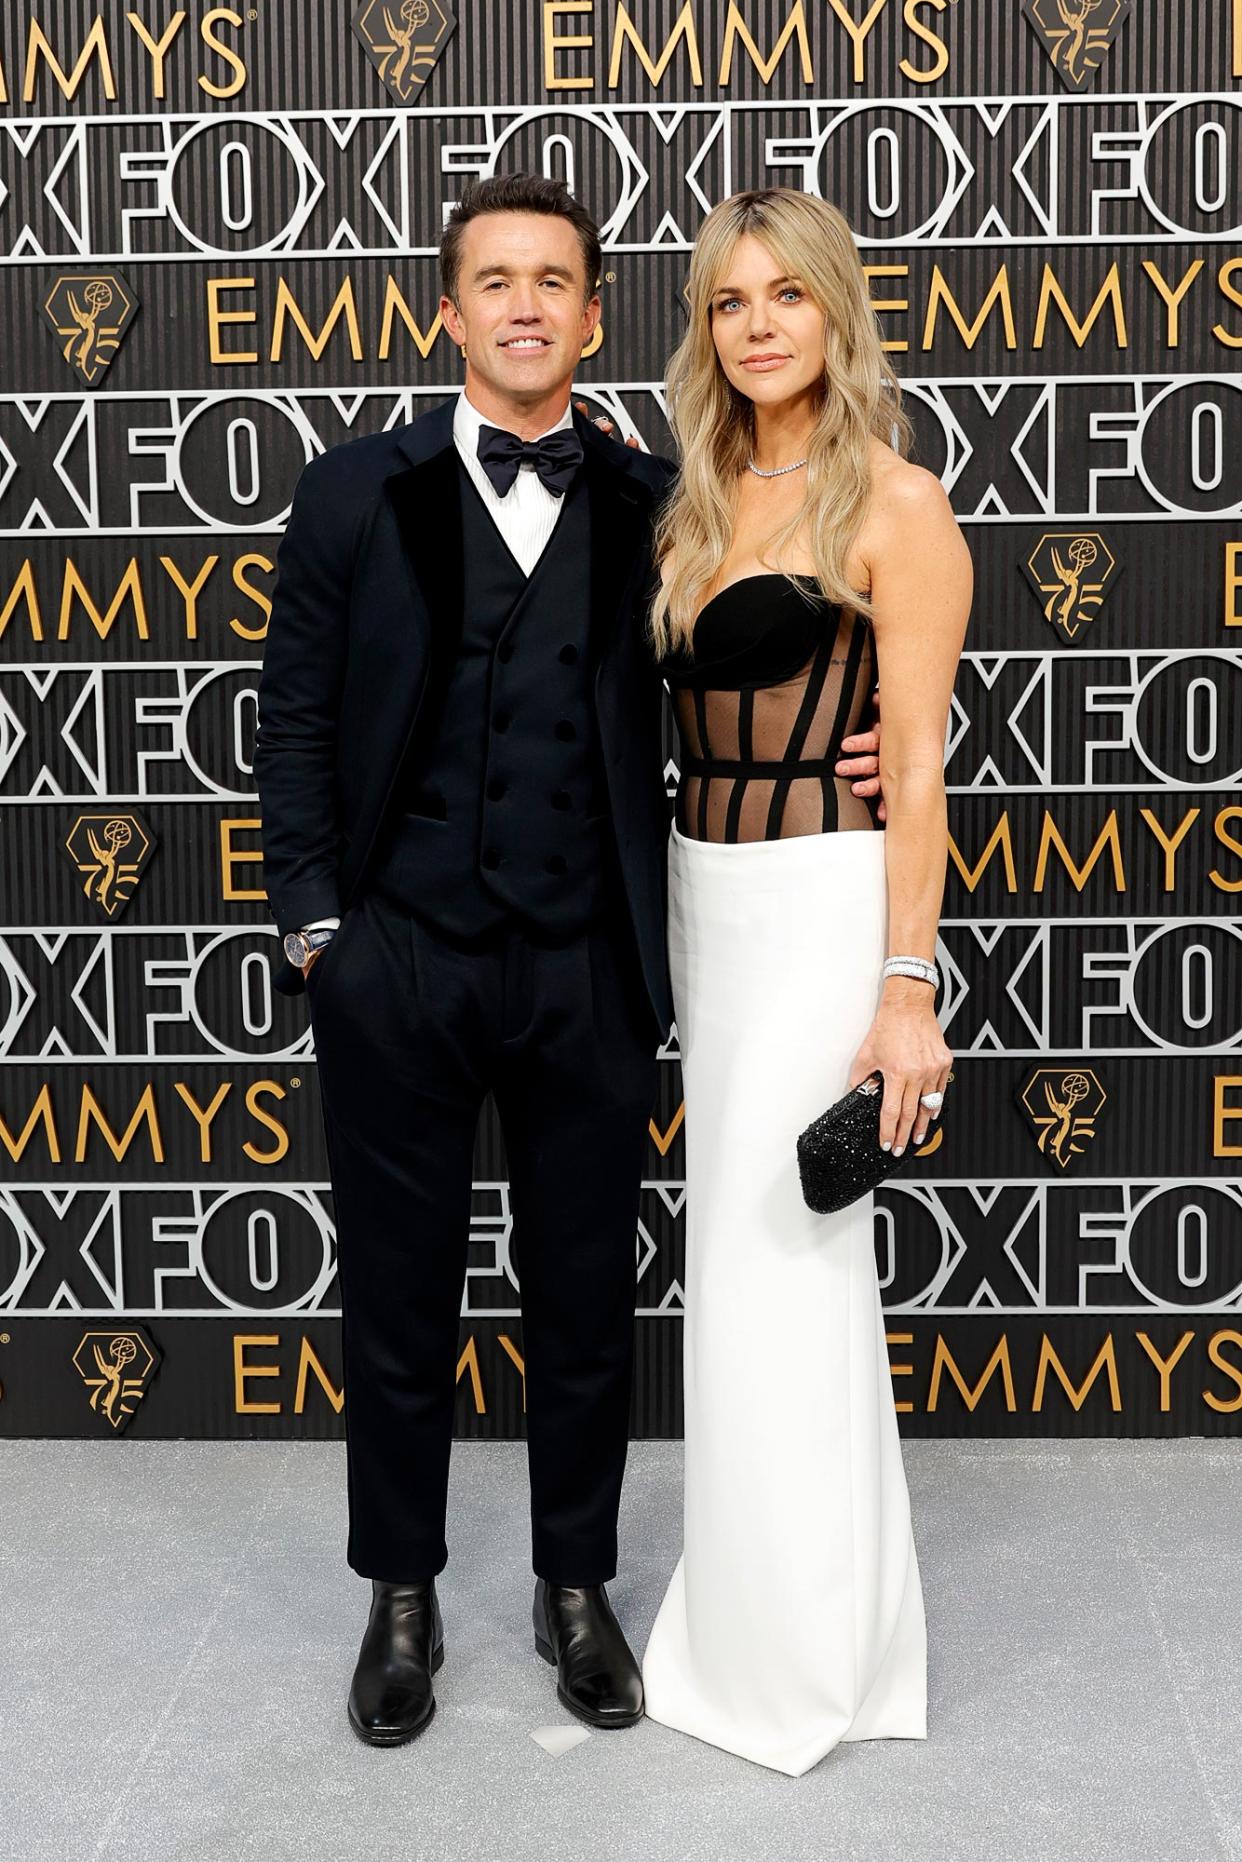 Rob McElhenney and Wife Kaitlin Olson Attend the Emmy Awards After Welcome to Wrexham Wins 644